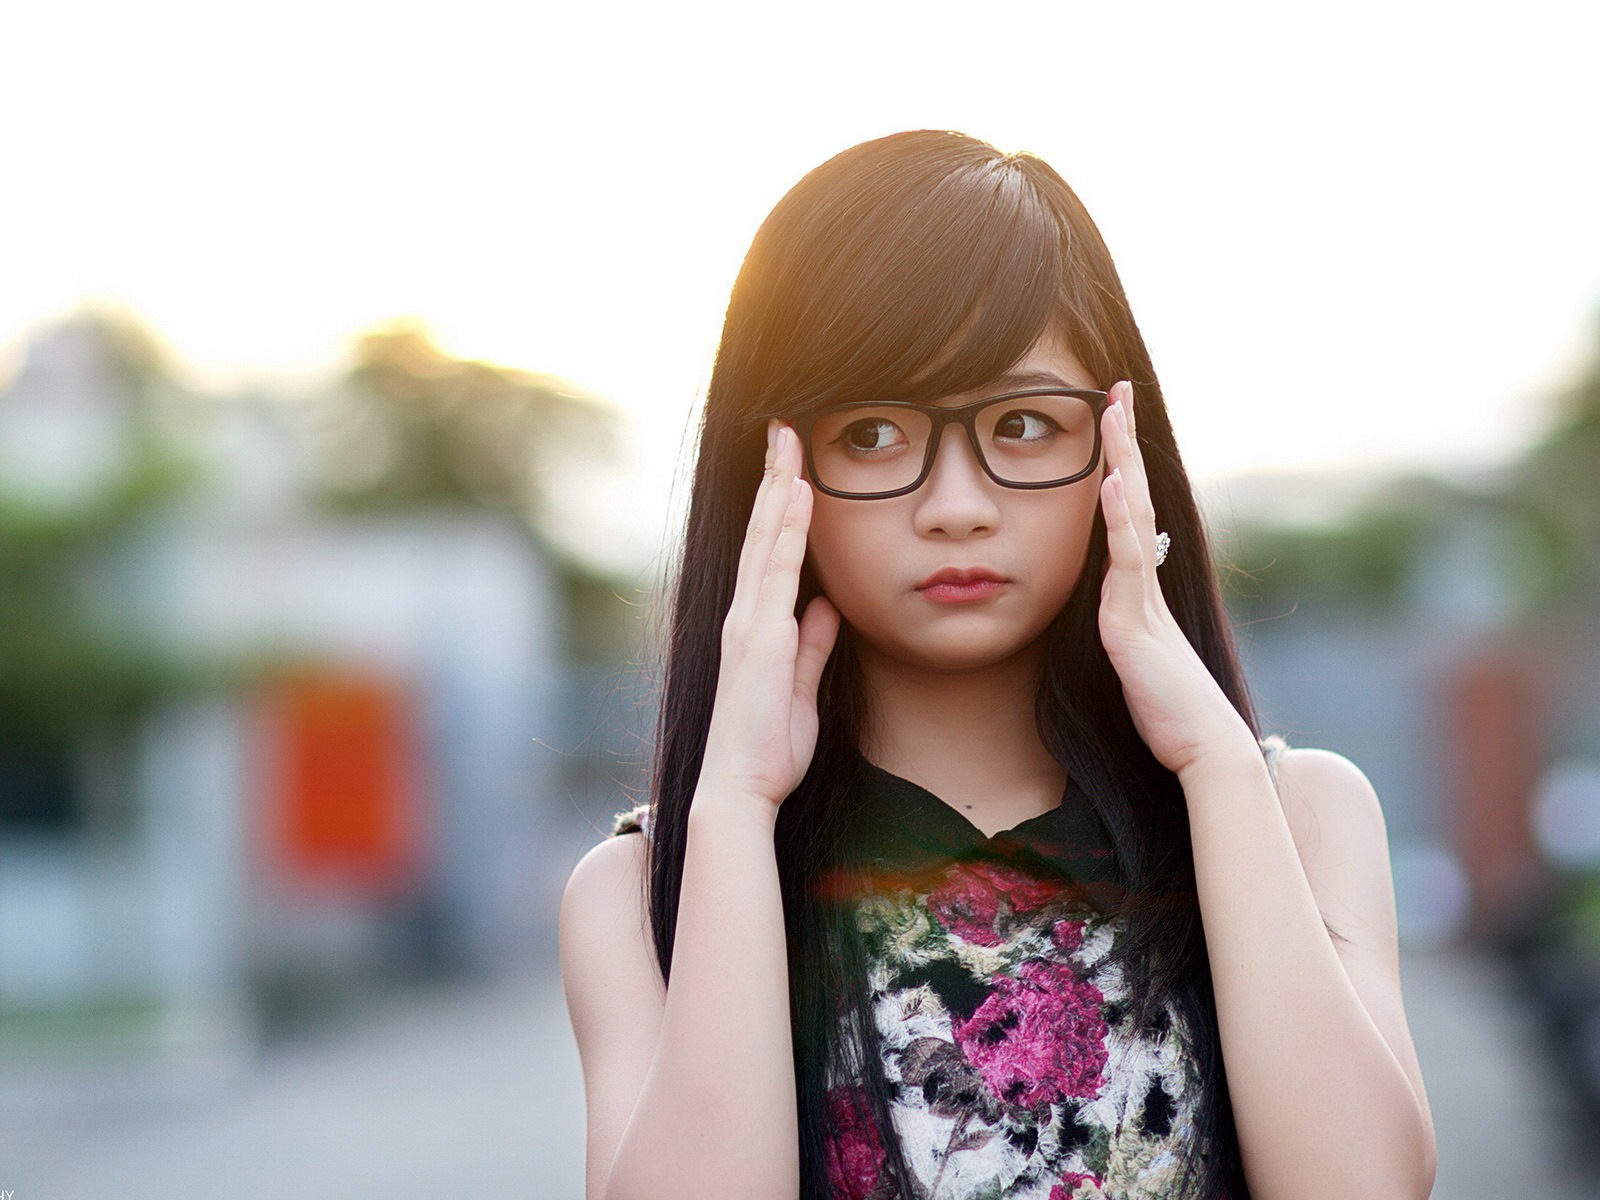 Pure and lovely young Asian girl HD wallpapers collection (3) #34 - 1600x1200